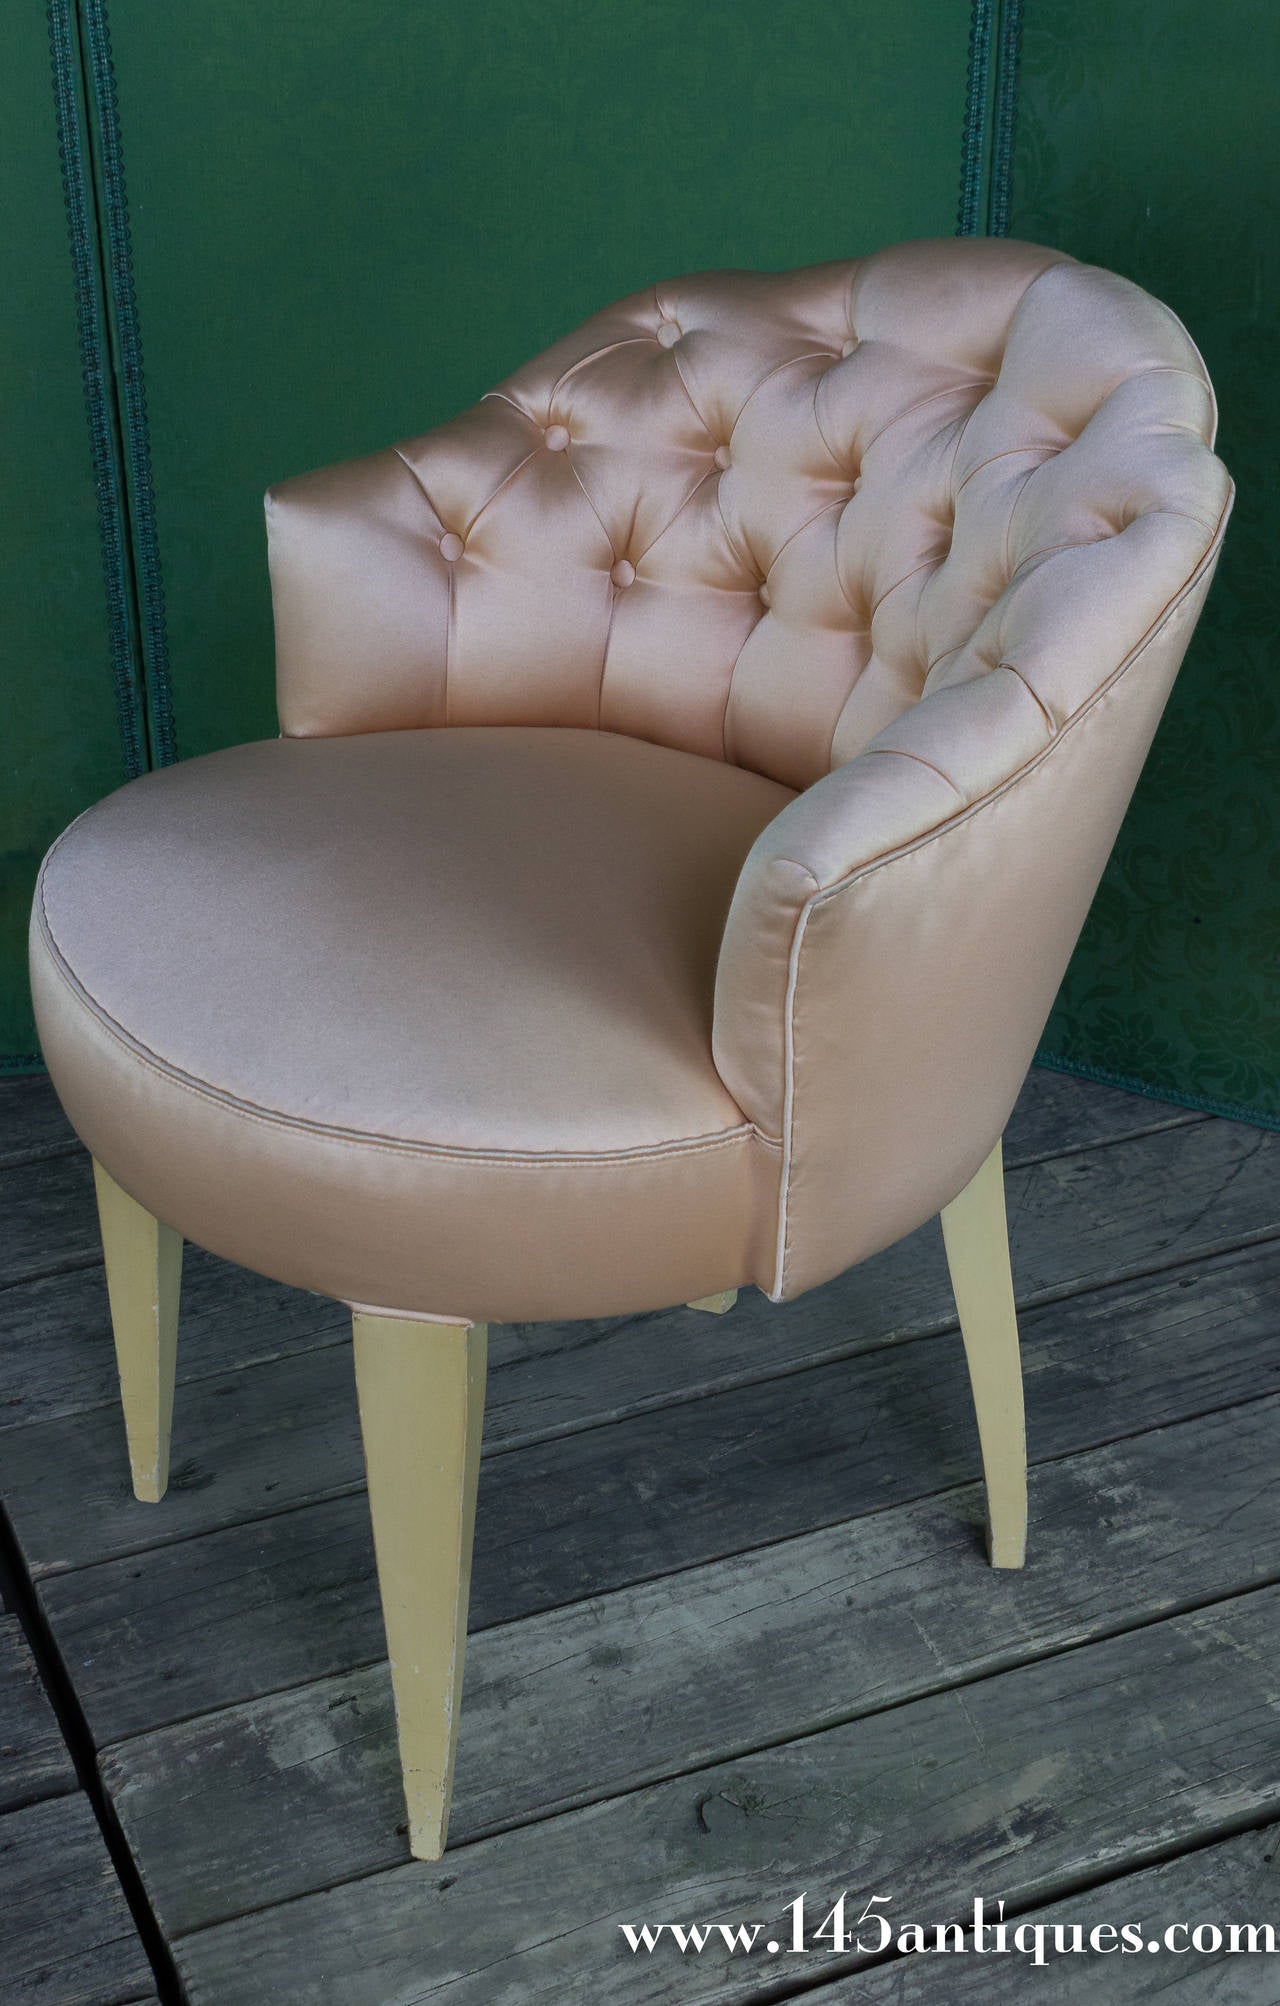 French tufted back vanity stool upholstered in a light peach satin. We have a matching slipper chair available.